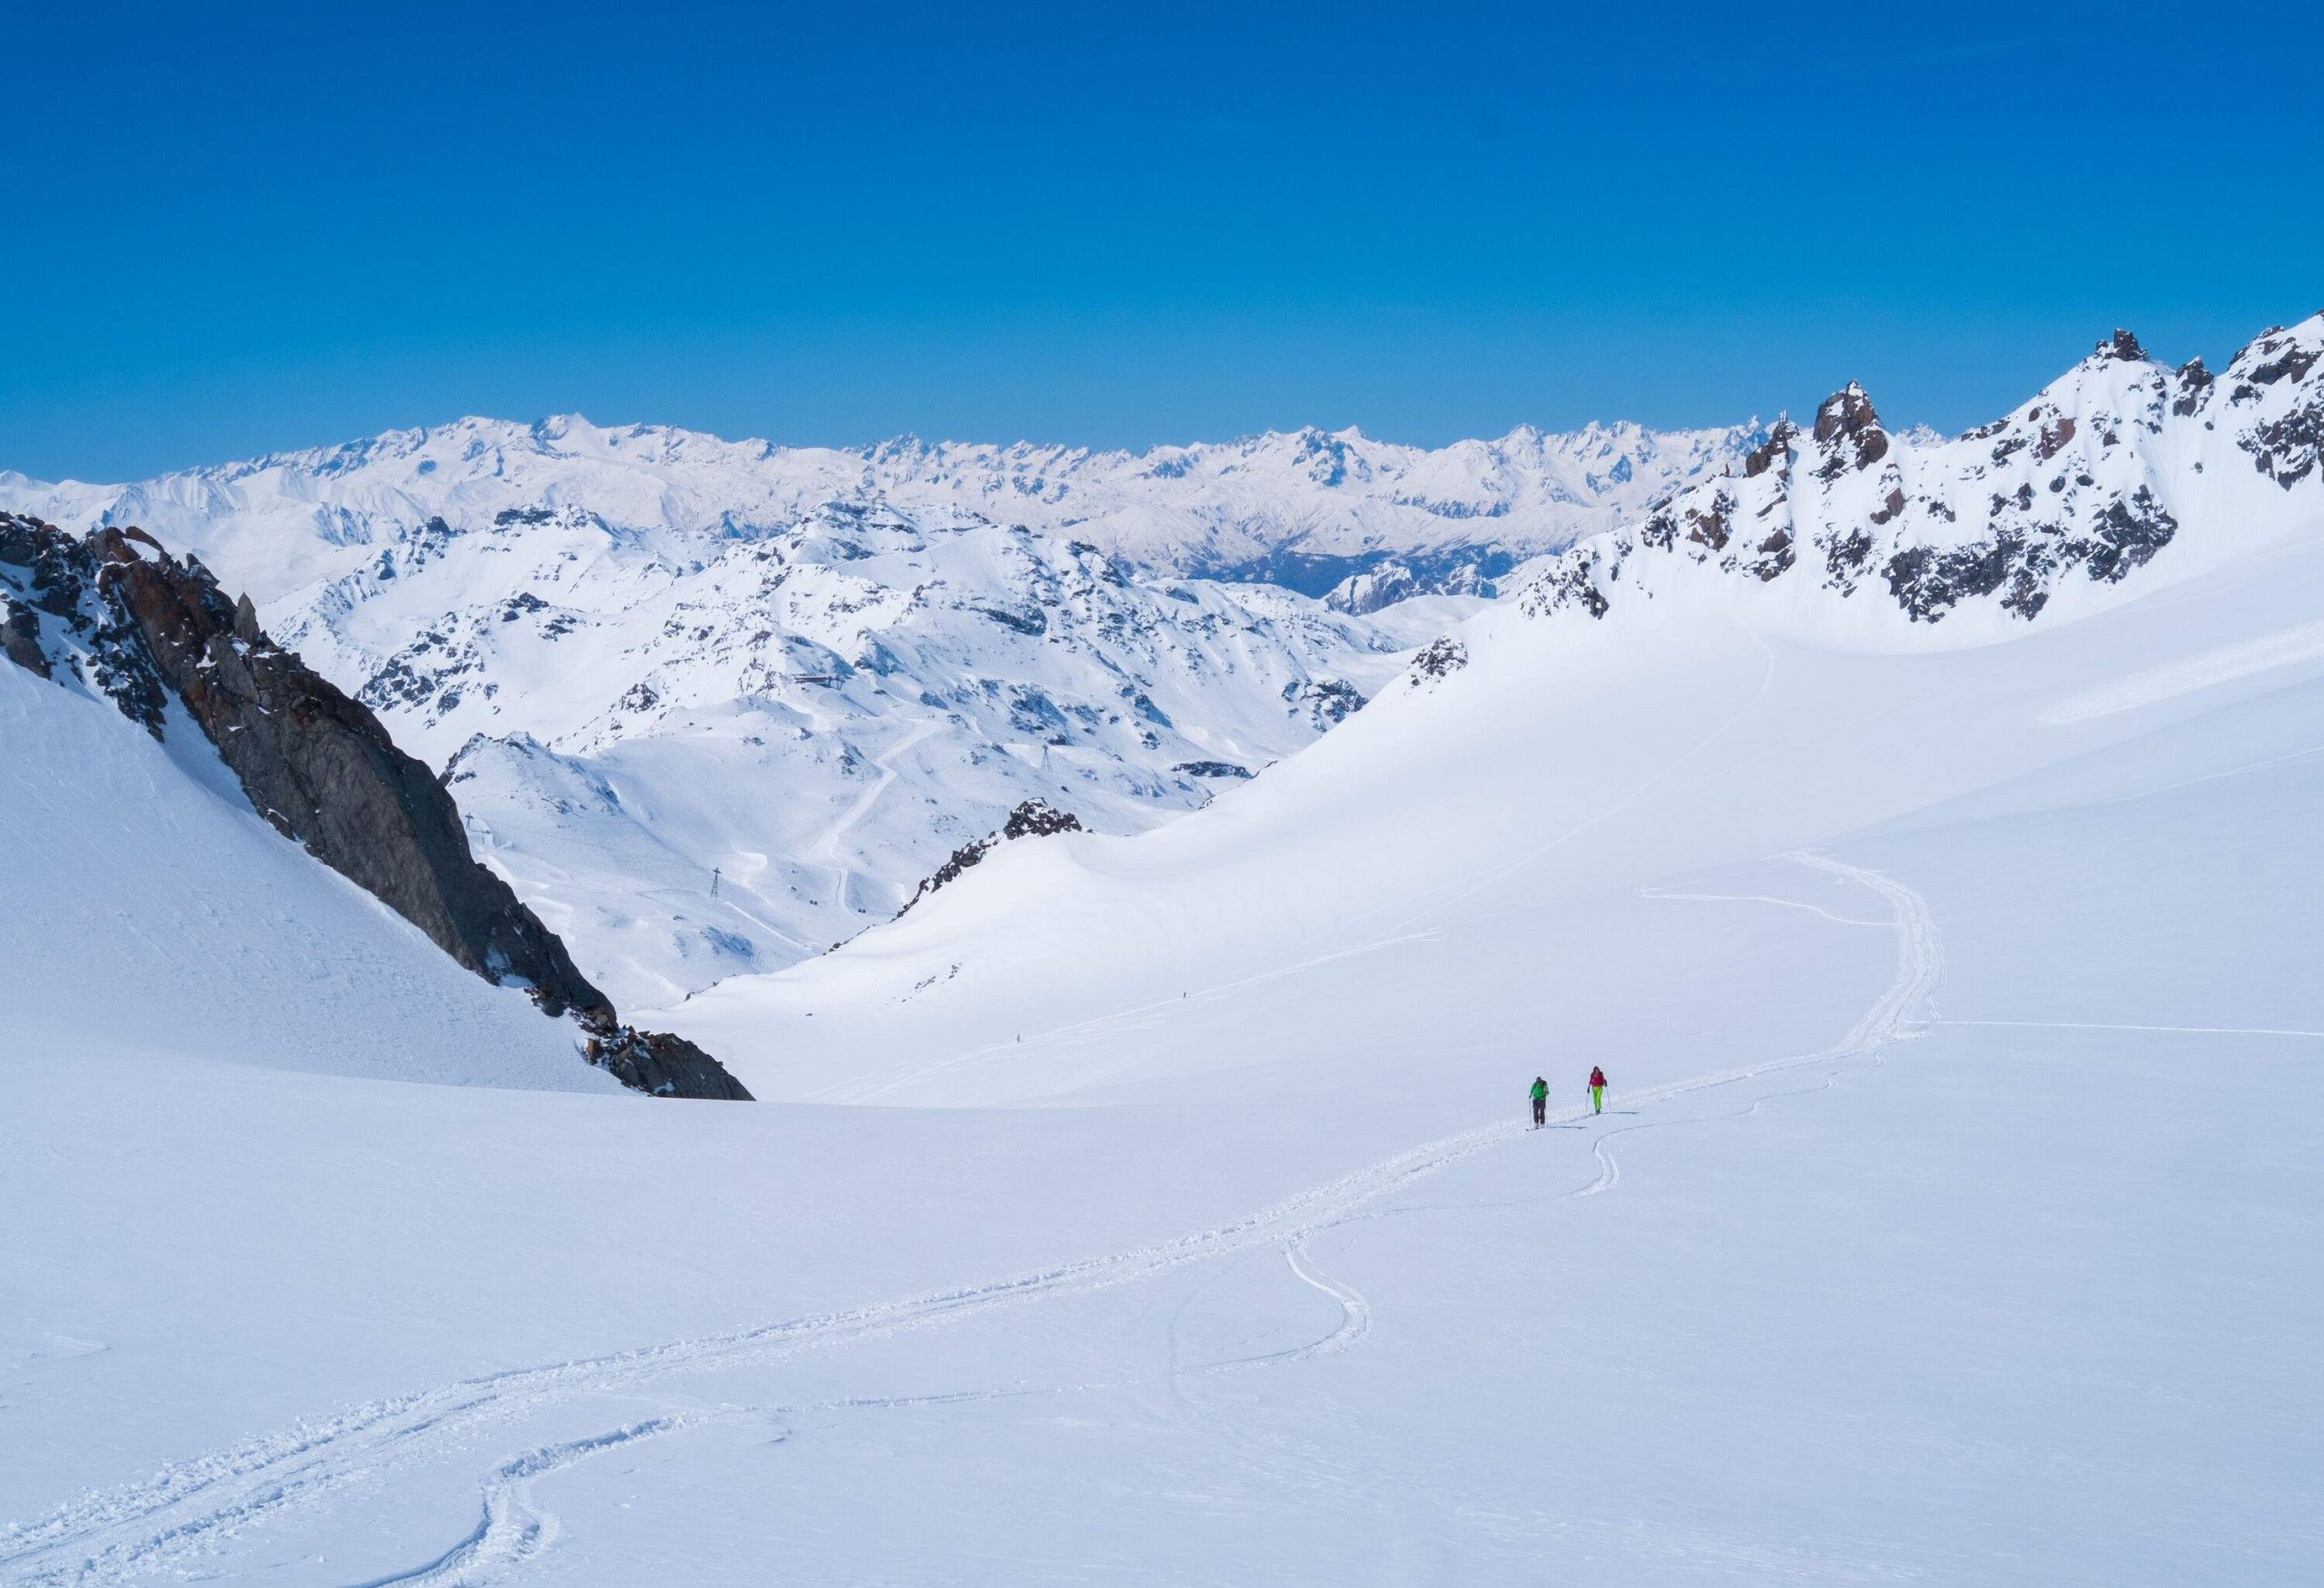 Two people walking across a large snowfield with views of snow-capped mountains on the horizon.